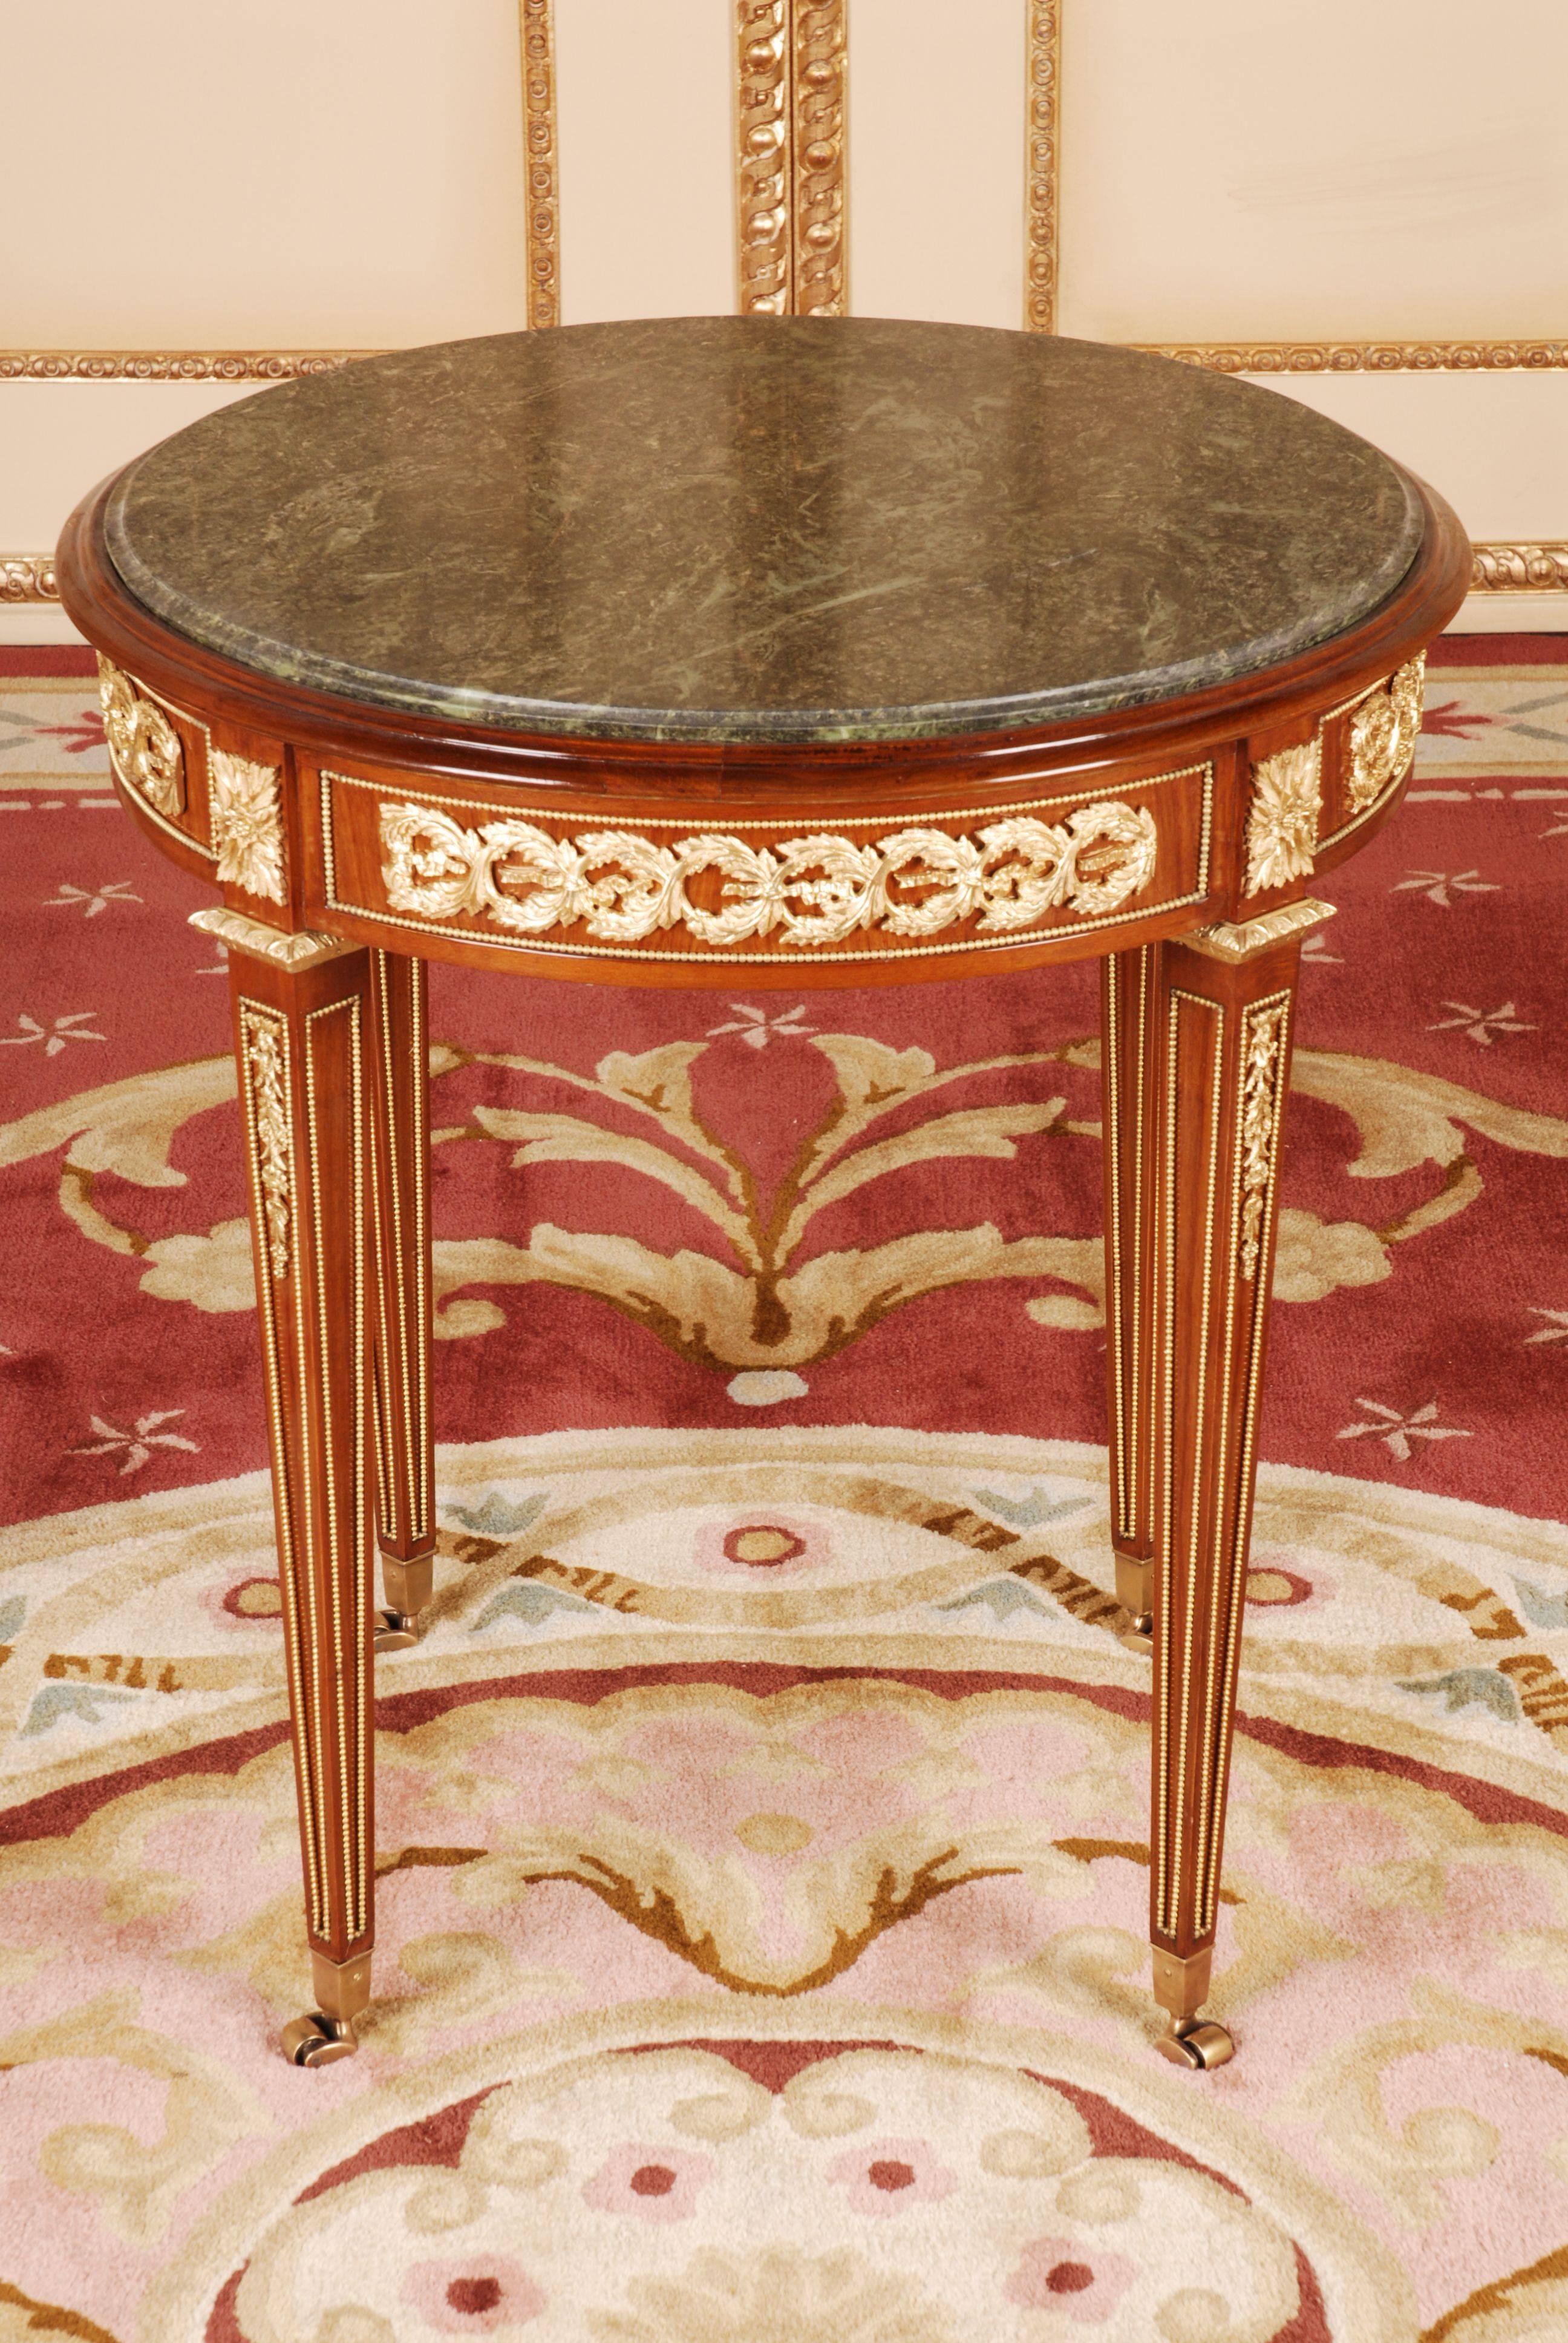 20th Century Louis XVI Style with Round Marble Platter French Table
Solid beechwood with partial veneer and finely engraved bronze fixtures.

(G-Sam-102) .